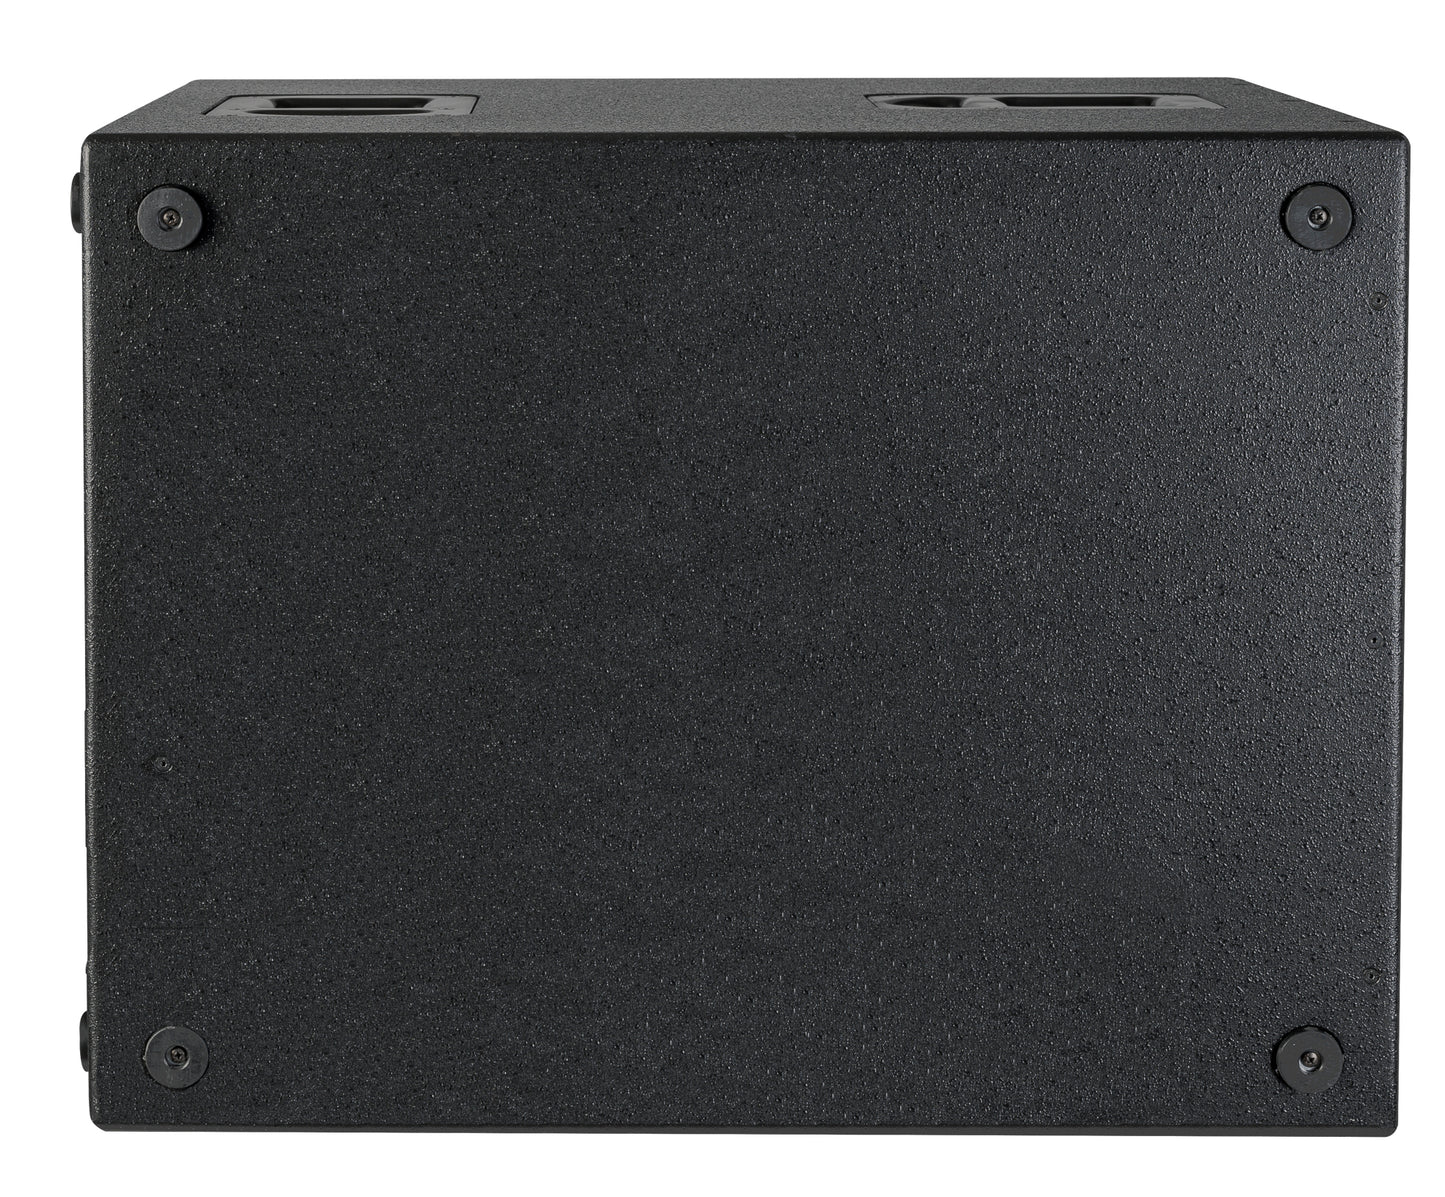 HK Audio LINEAR 5 MKII 118 Sub HPA Subwoofer - Each - Black